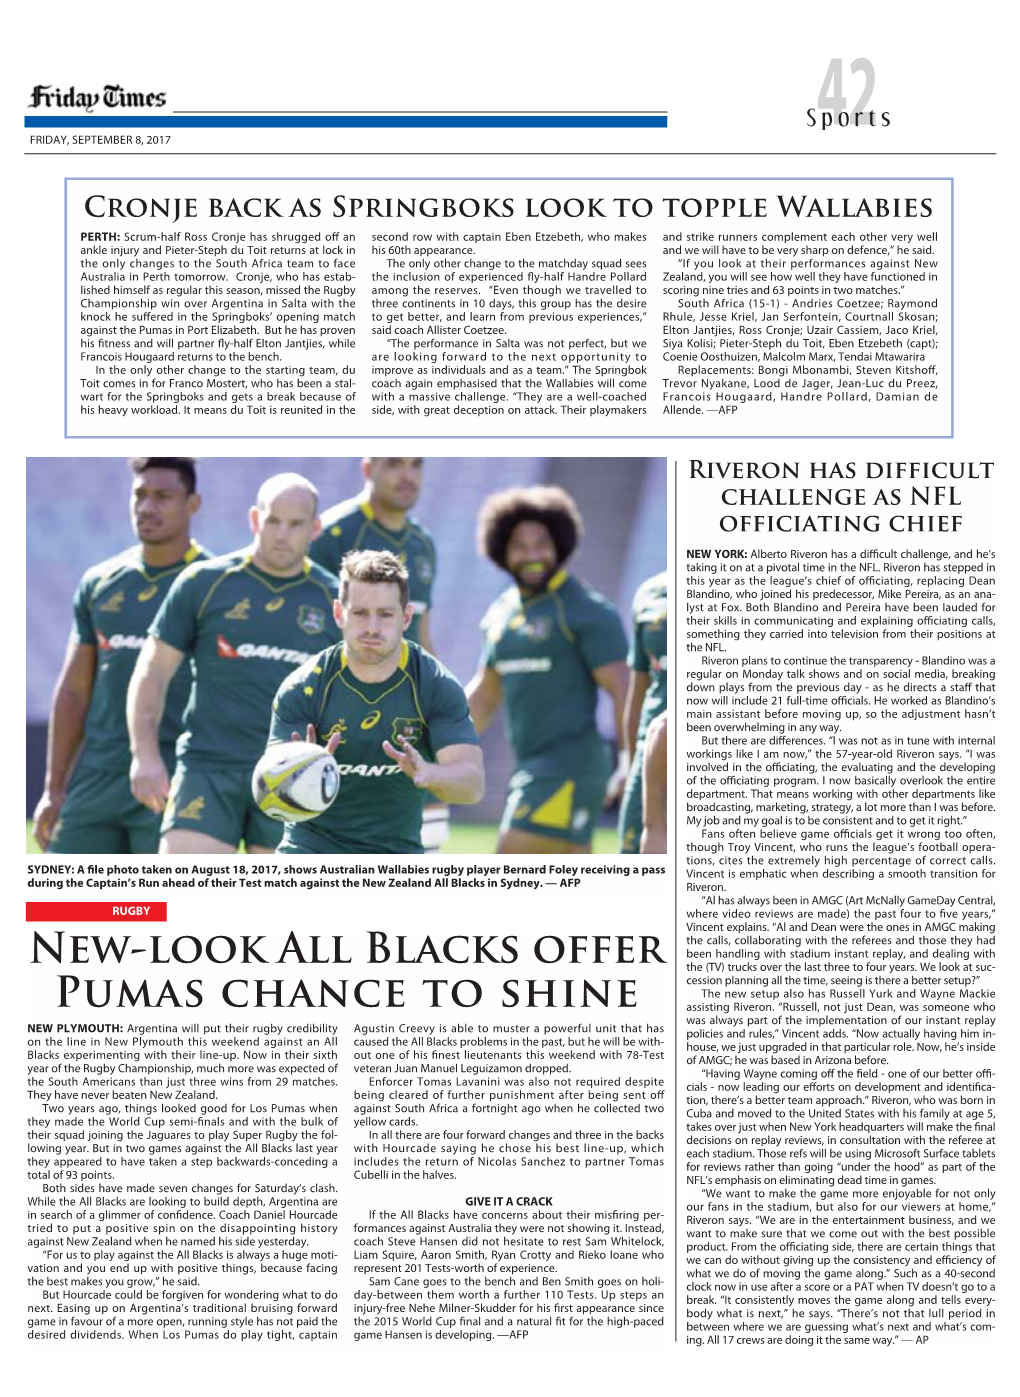 New-Look All Blacks Offer Pumas Chance to Shine